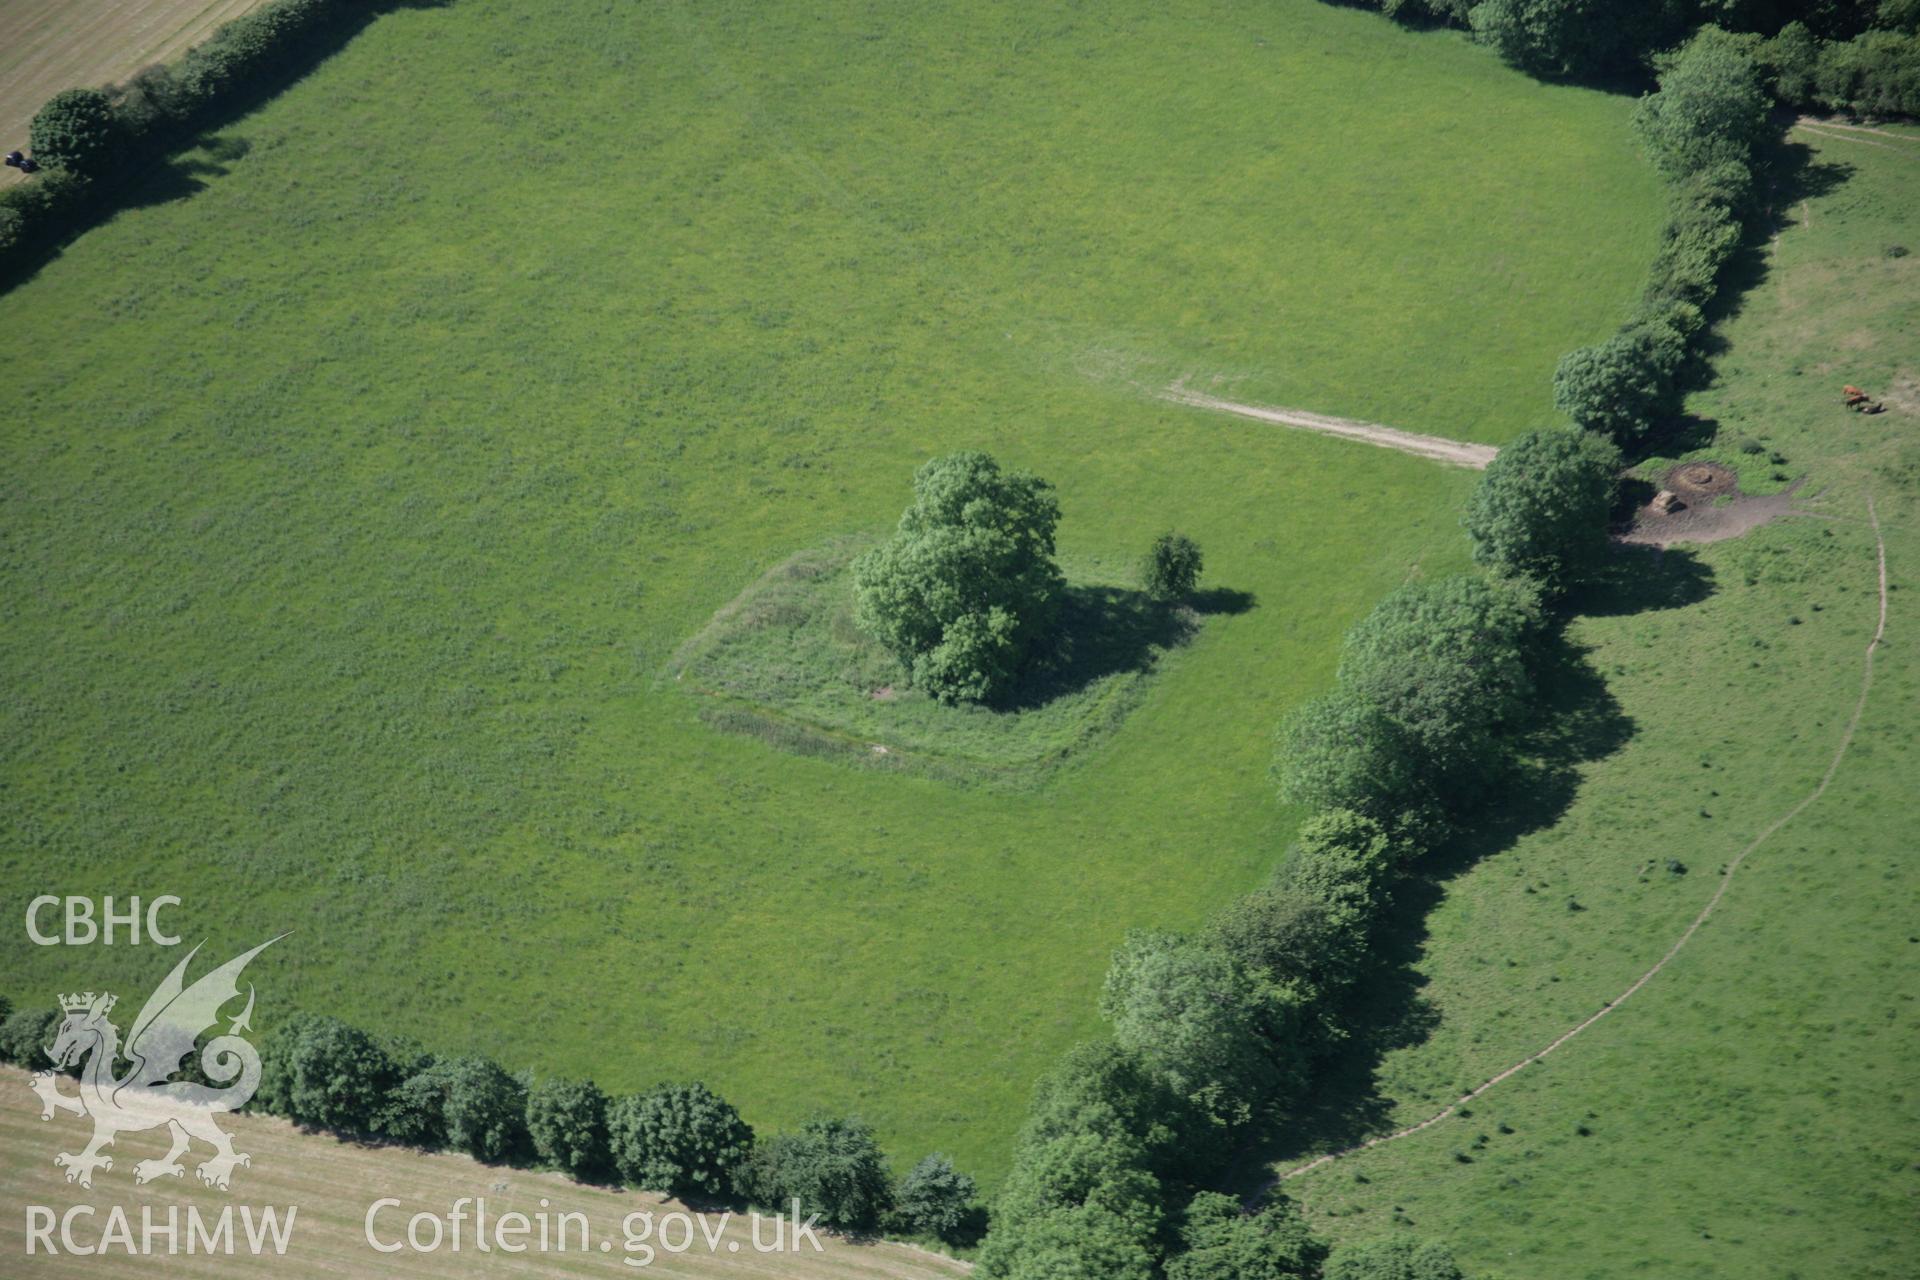 RCAHMW colour oblique aerial photograph of the remains of St.Mary's Church from the south-east. Taken on 23 June 2005 by Toby Driver